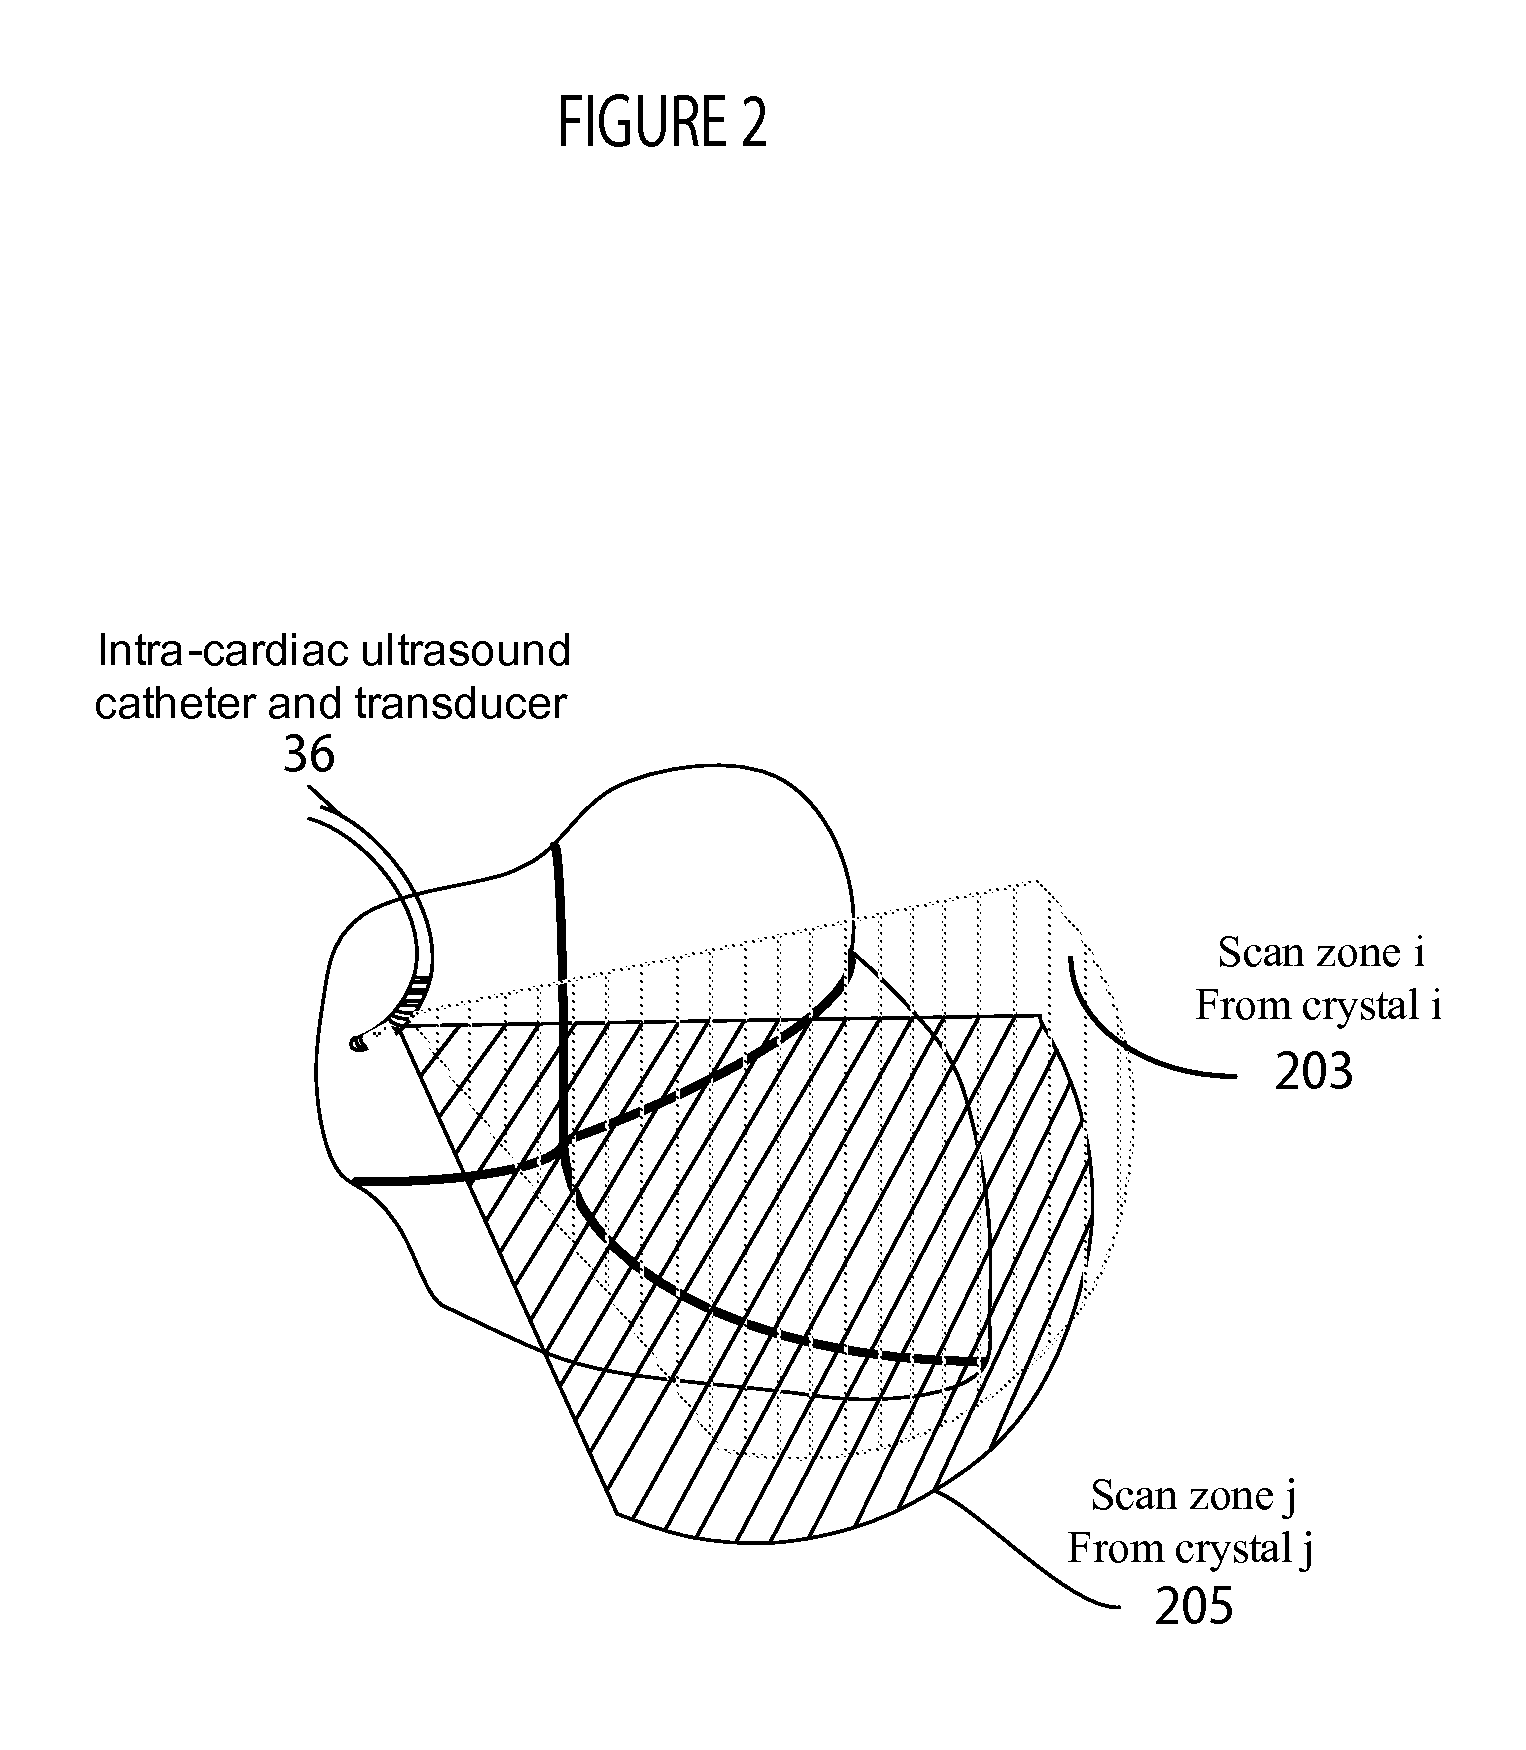 System for Cardiac Ultrasound Image Acquisition